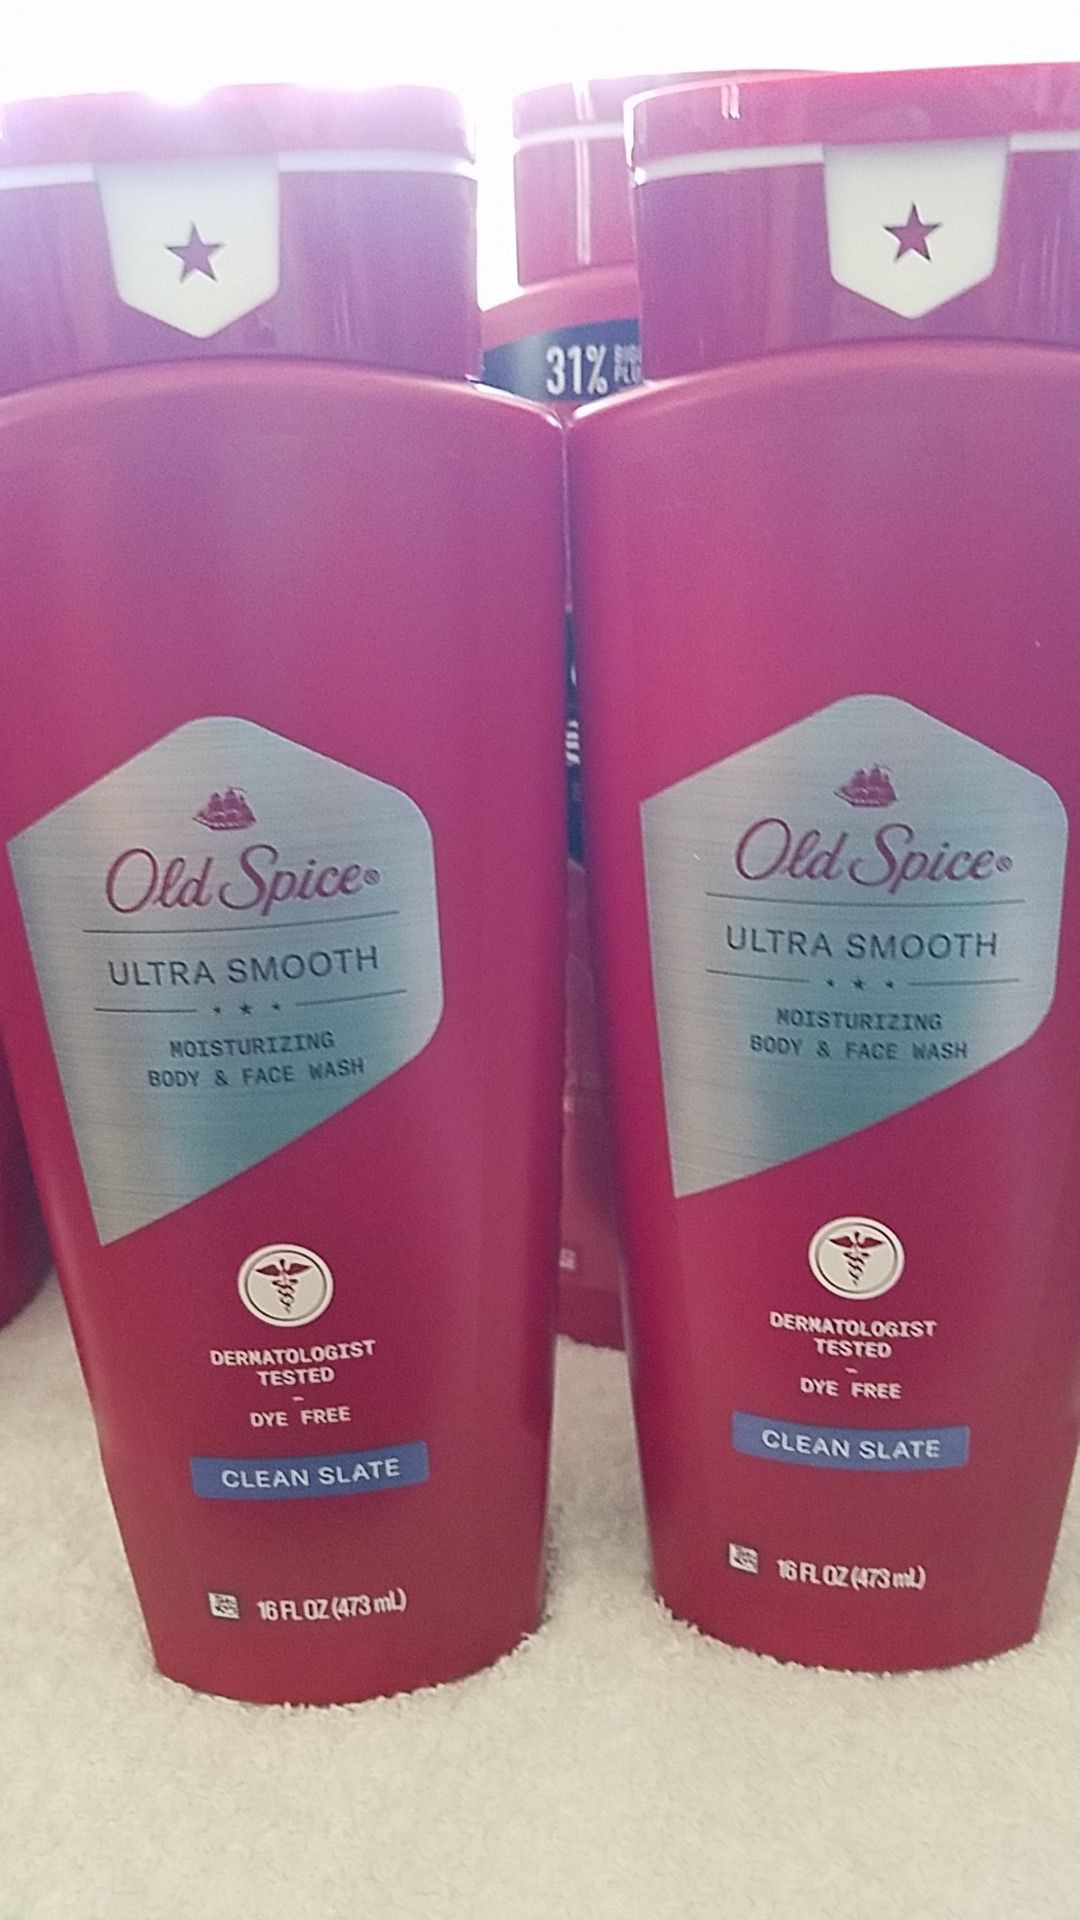 Old spice ultra smooth body and face wash